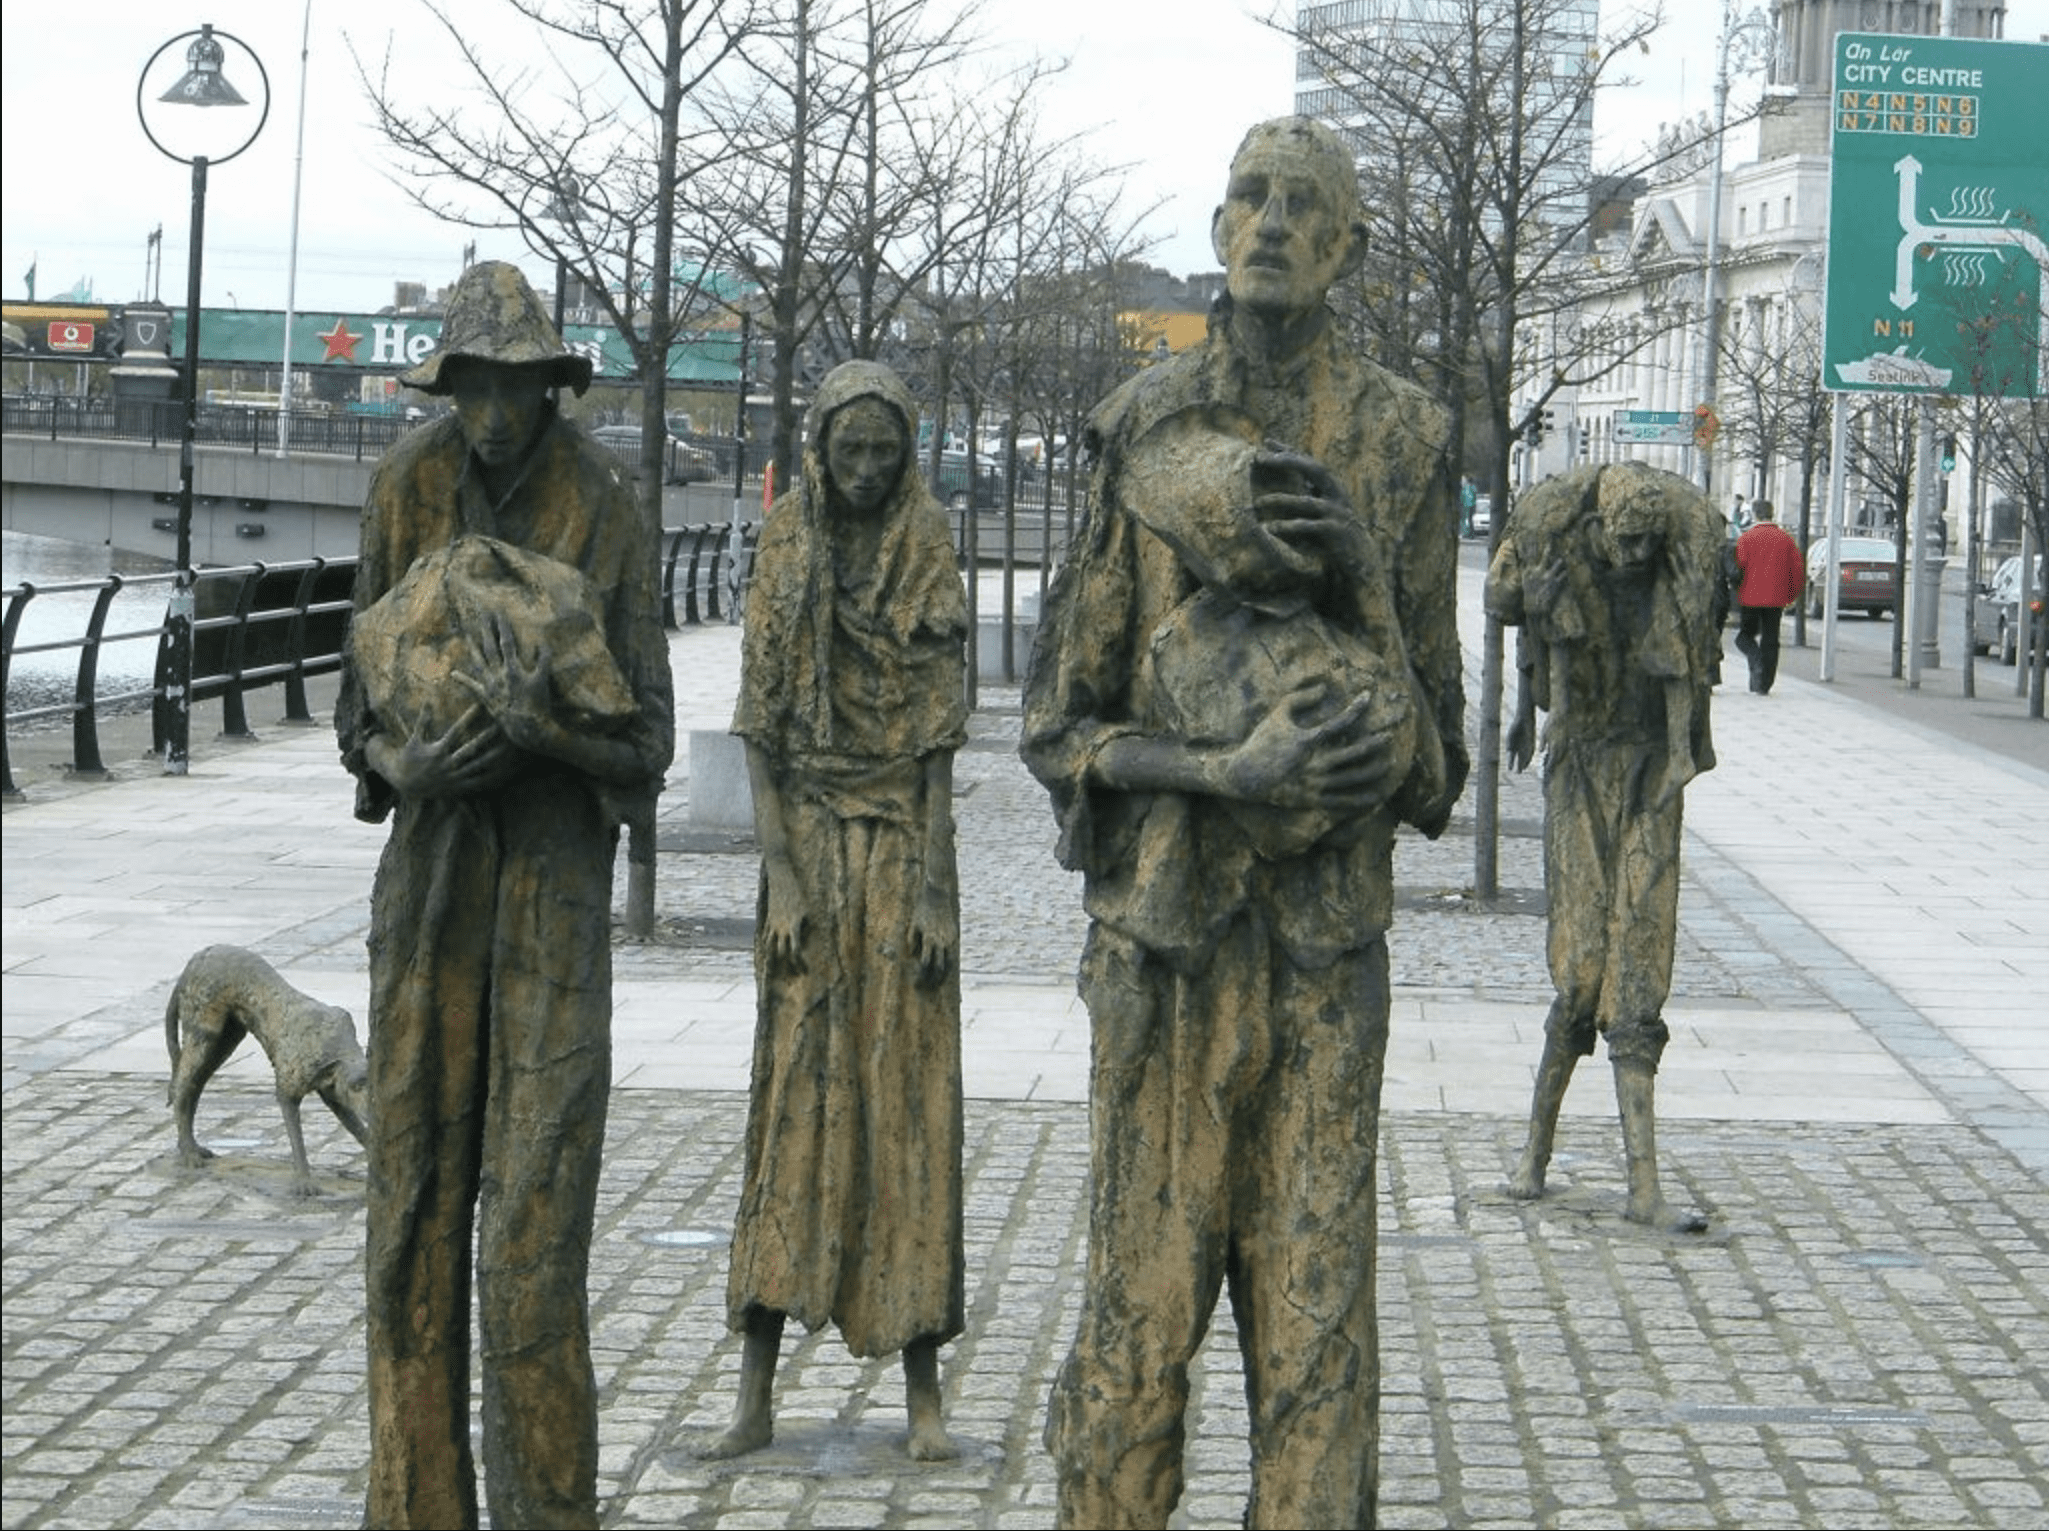 Statues and people along the river in Dublin as memorial to the famine